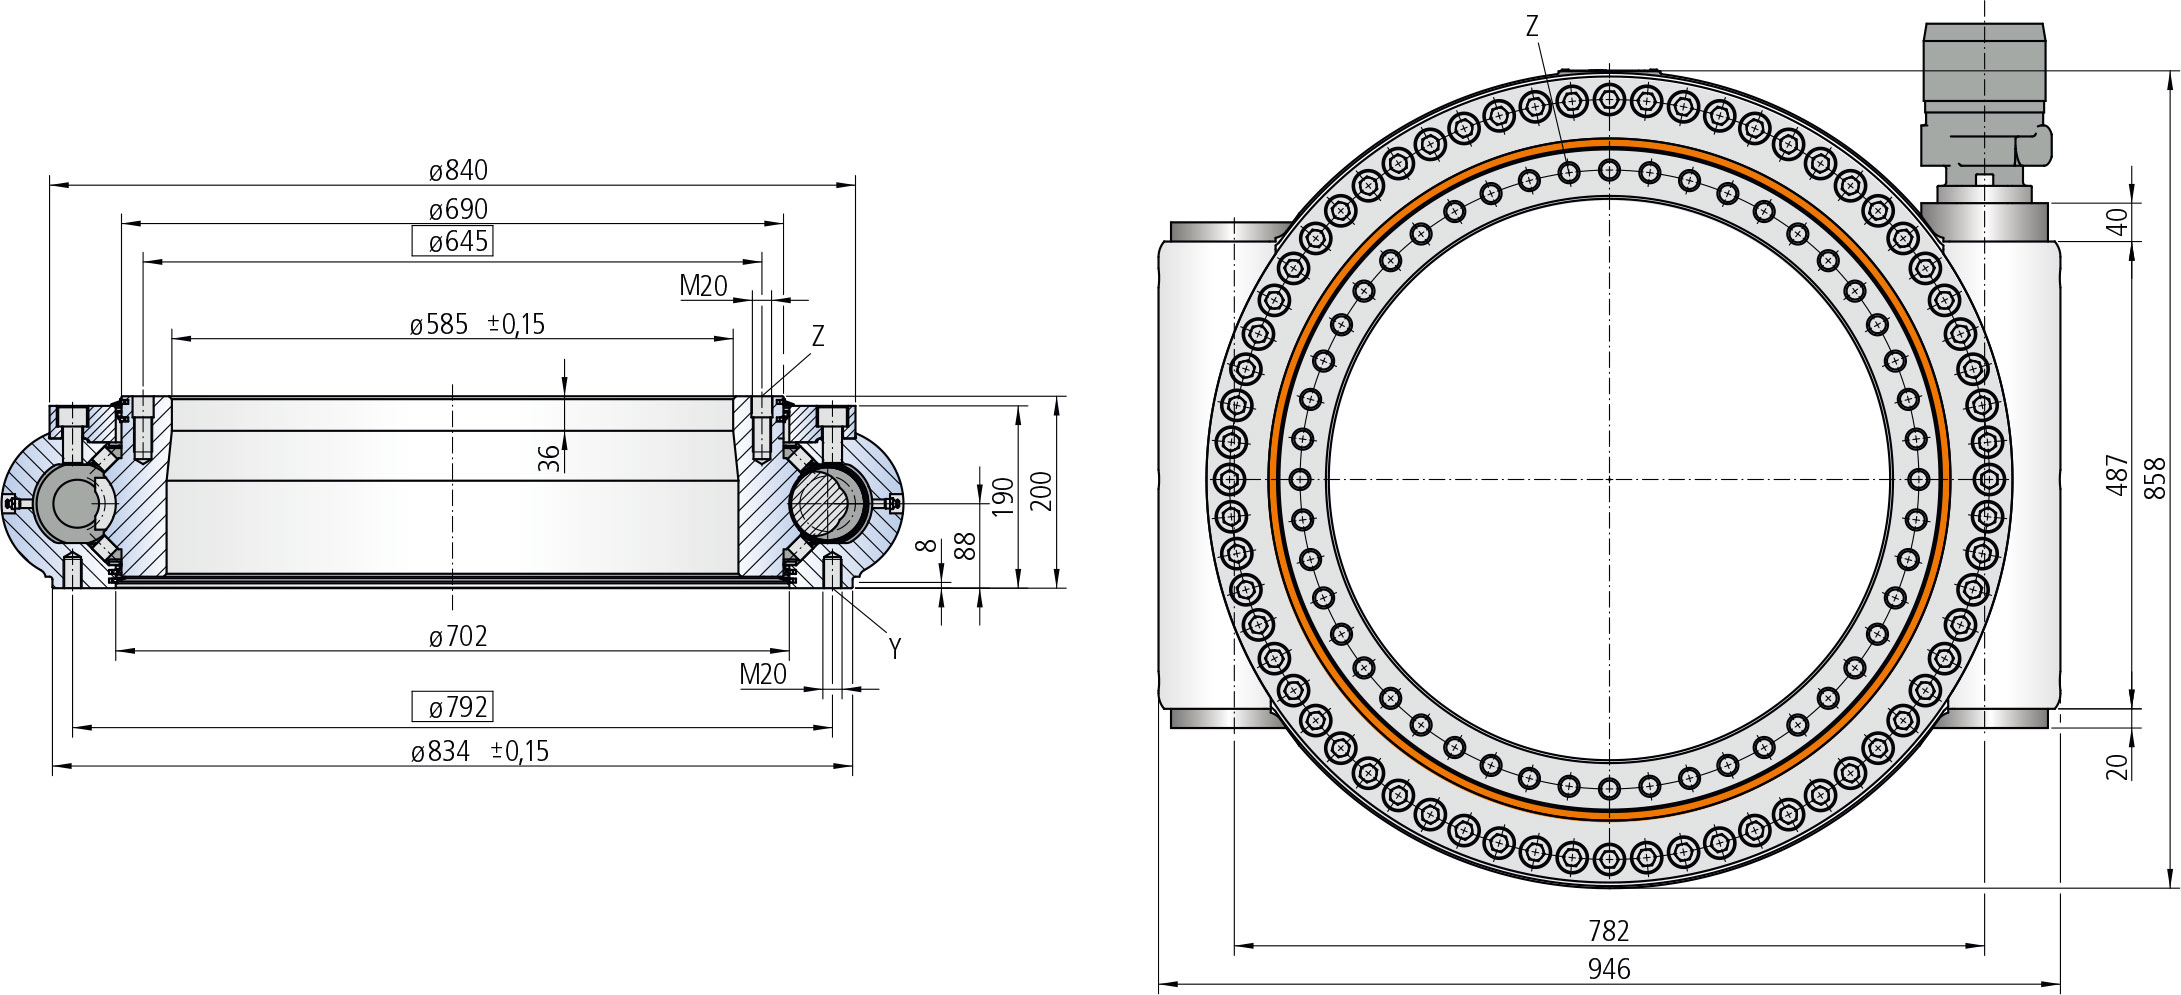 WD-H 0645 / 1 drive WD-H Series cad drawing